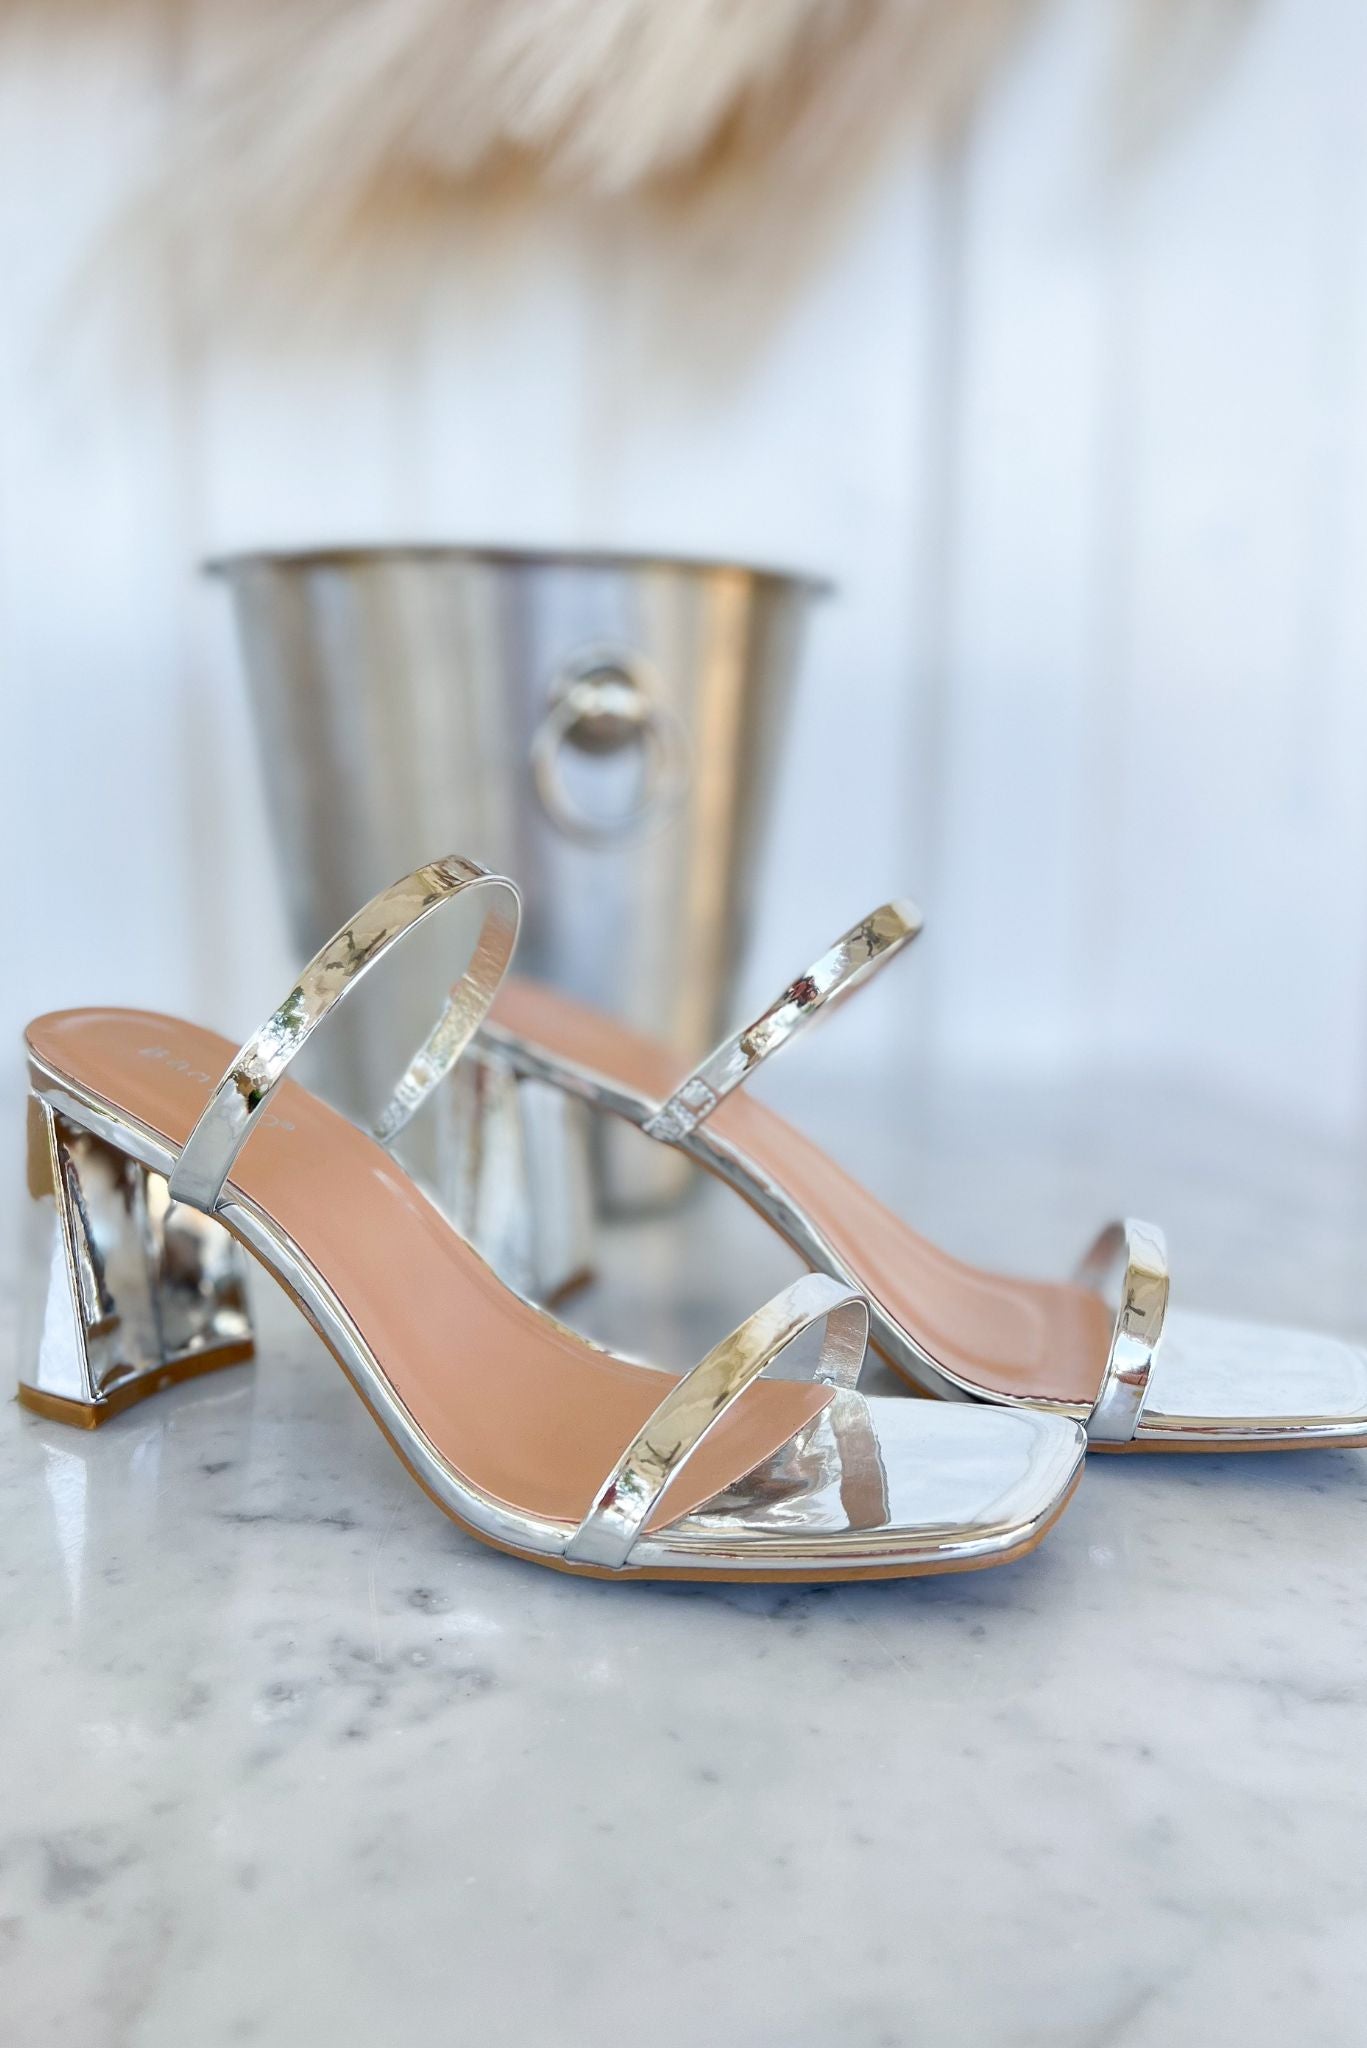 Silver Patent Double Band Slide Heels, wedding heels, date night, elevated look, must have, shop style your senses by mallory fitzsimmons